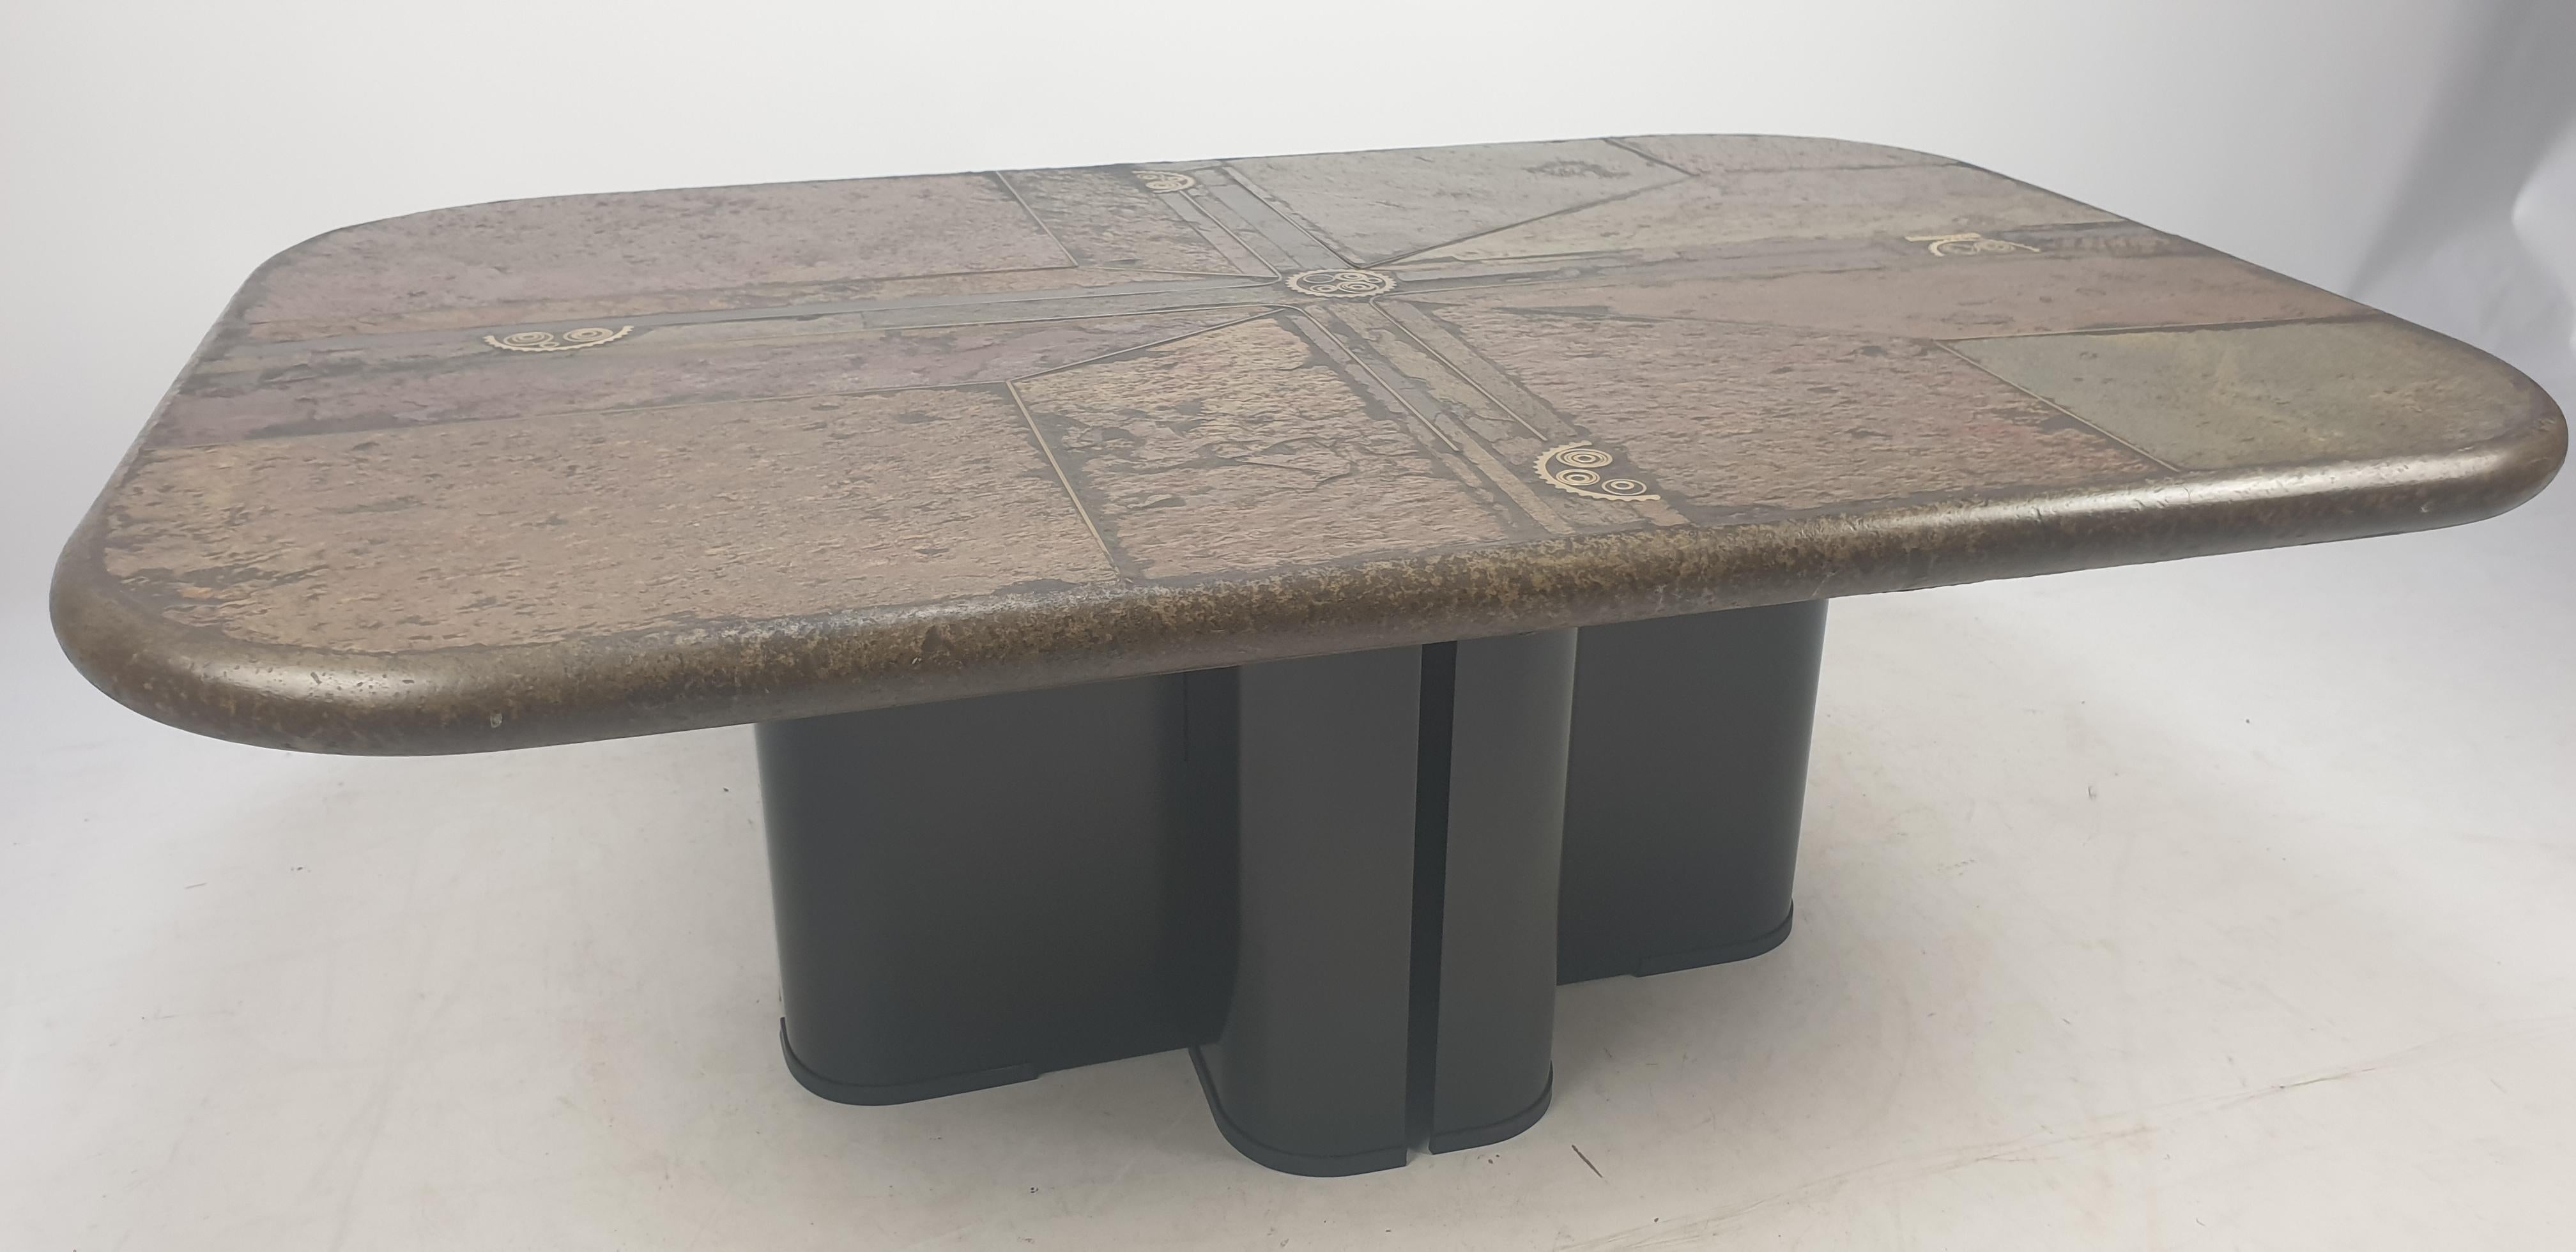 Late 20th Century Square Coffee Table by Marcus Kingma, 1991